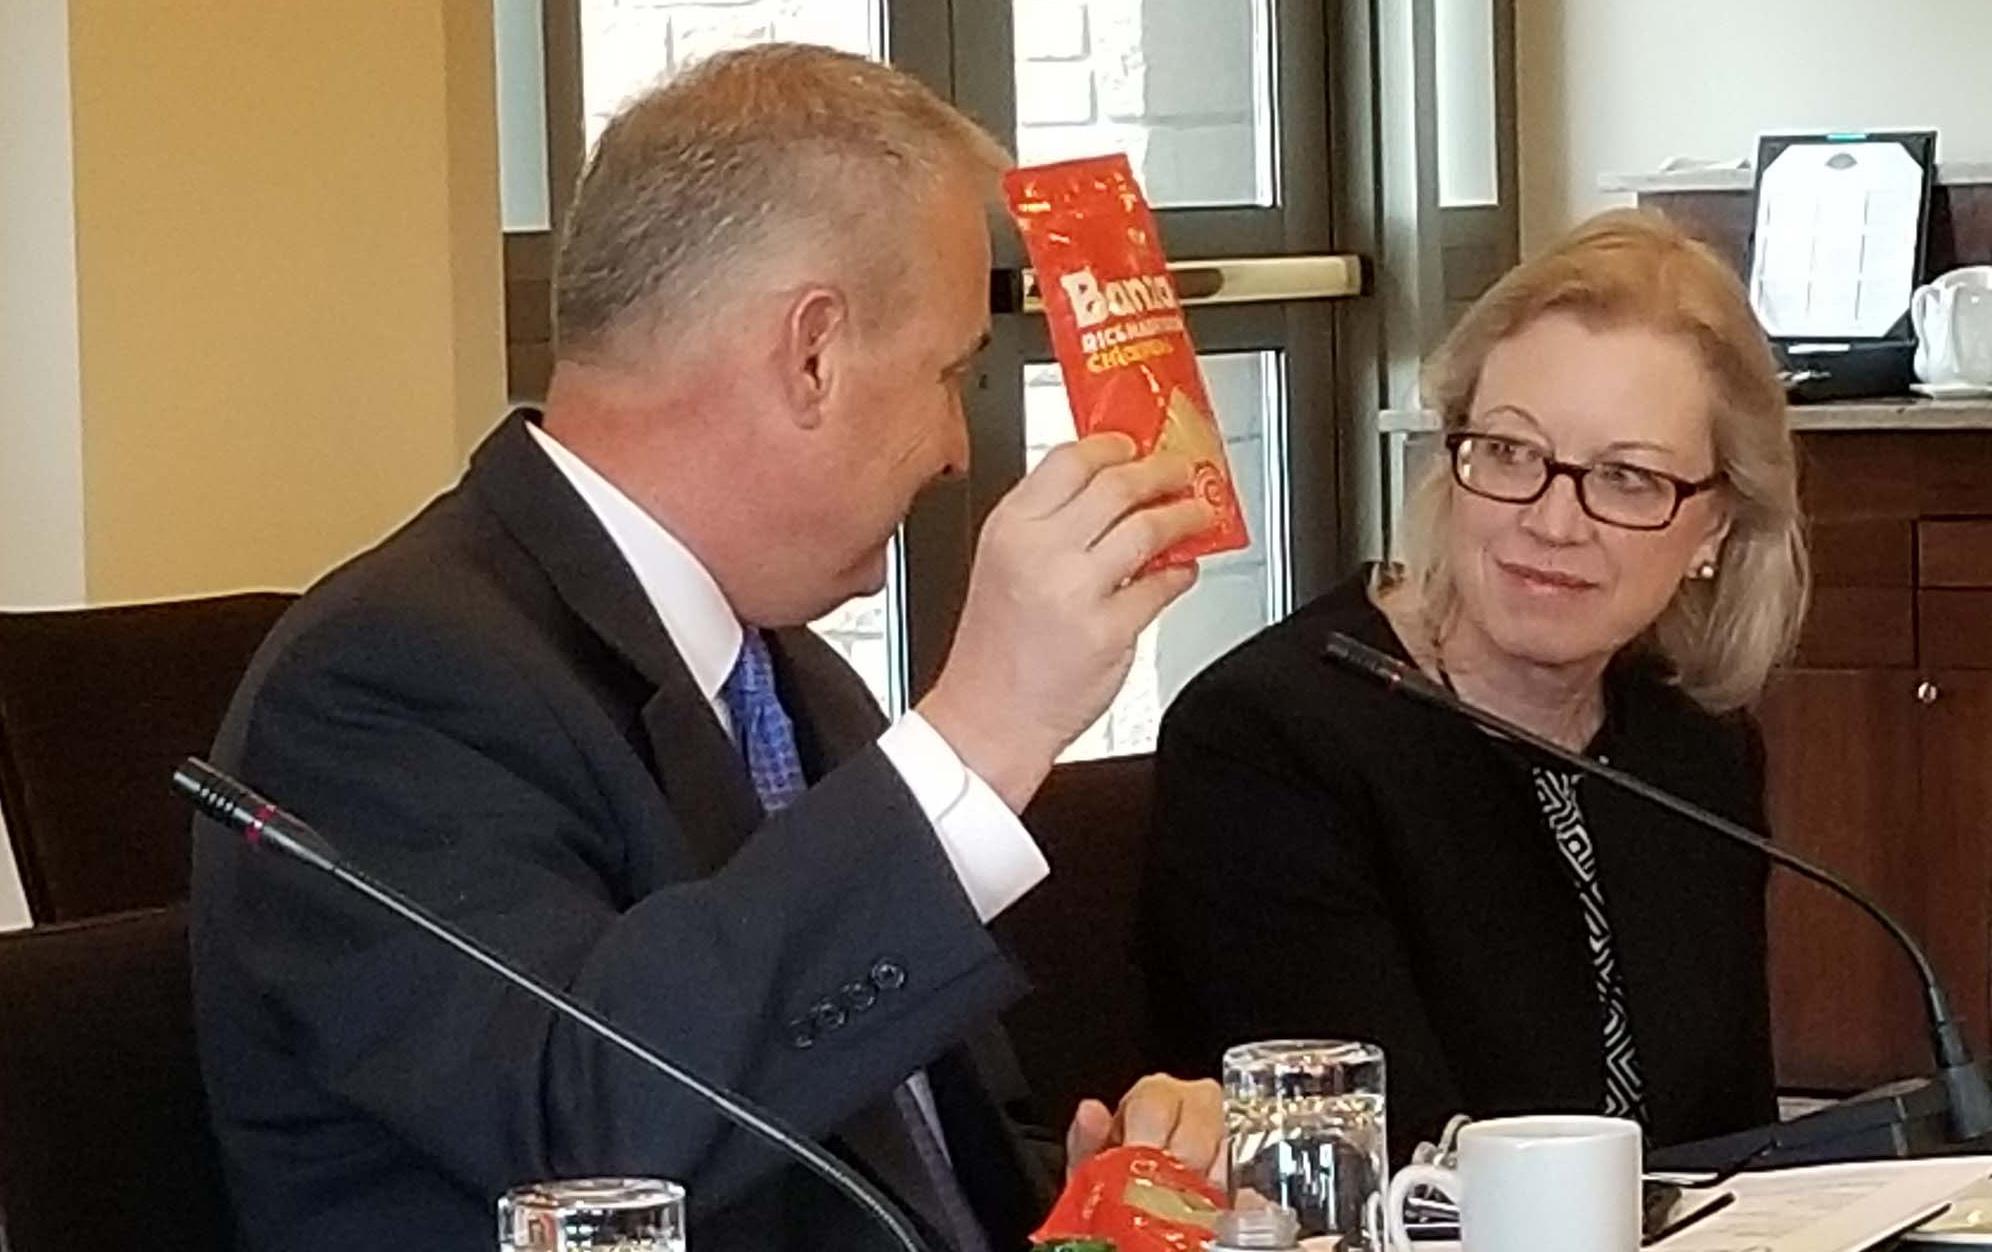 At a business meeting a man holds up a small, orange package while a woman wearing glasses smiles at him